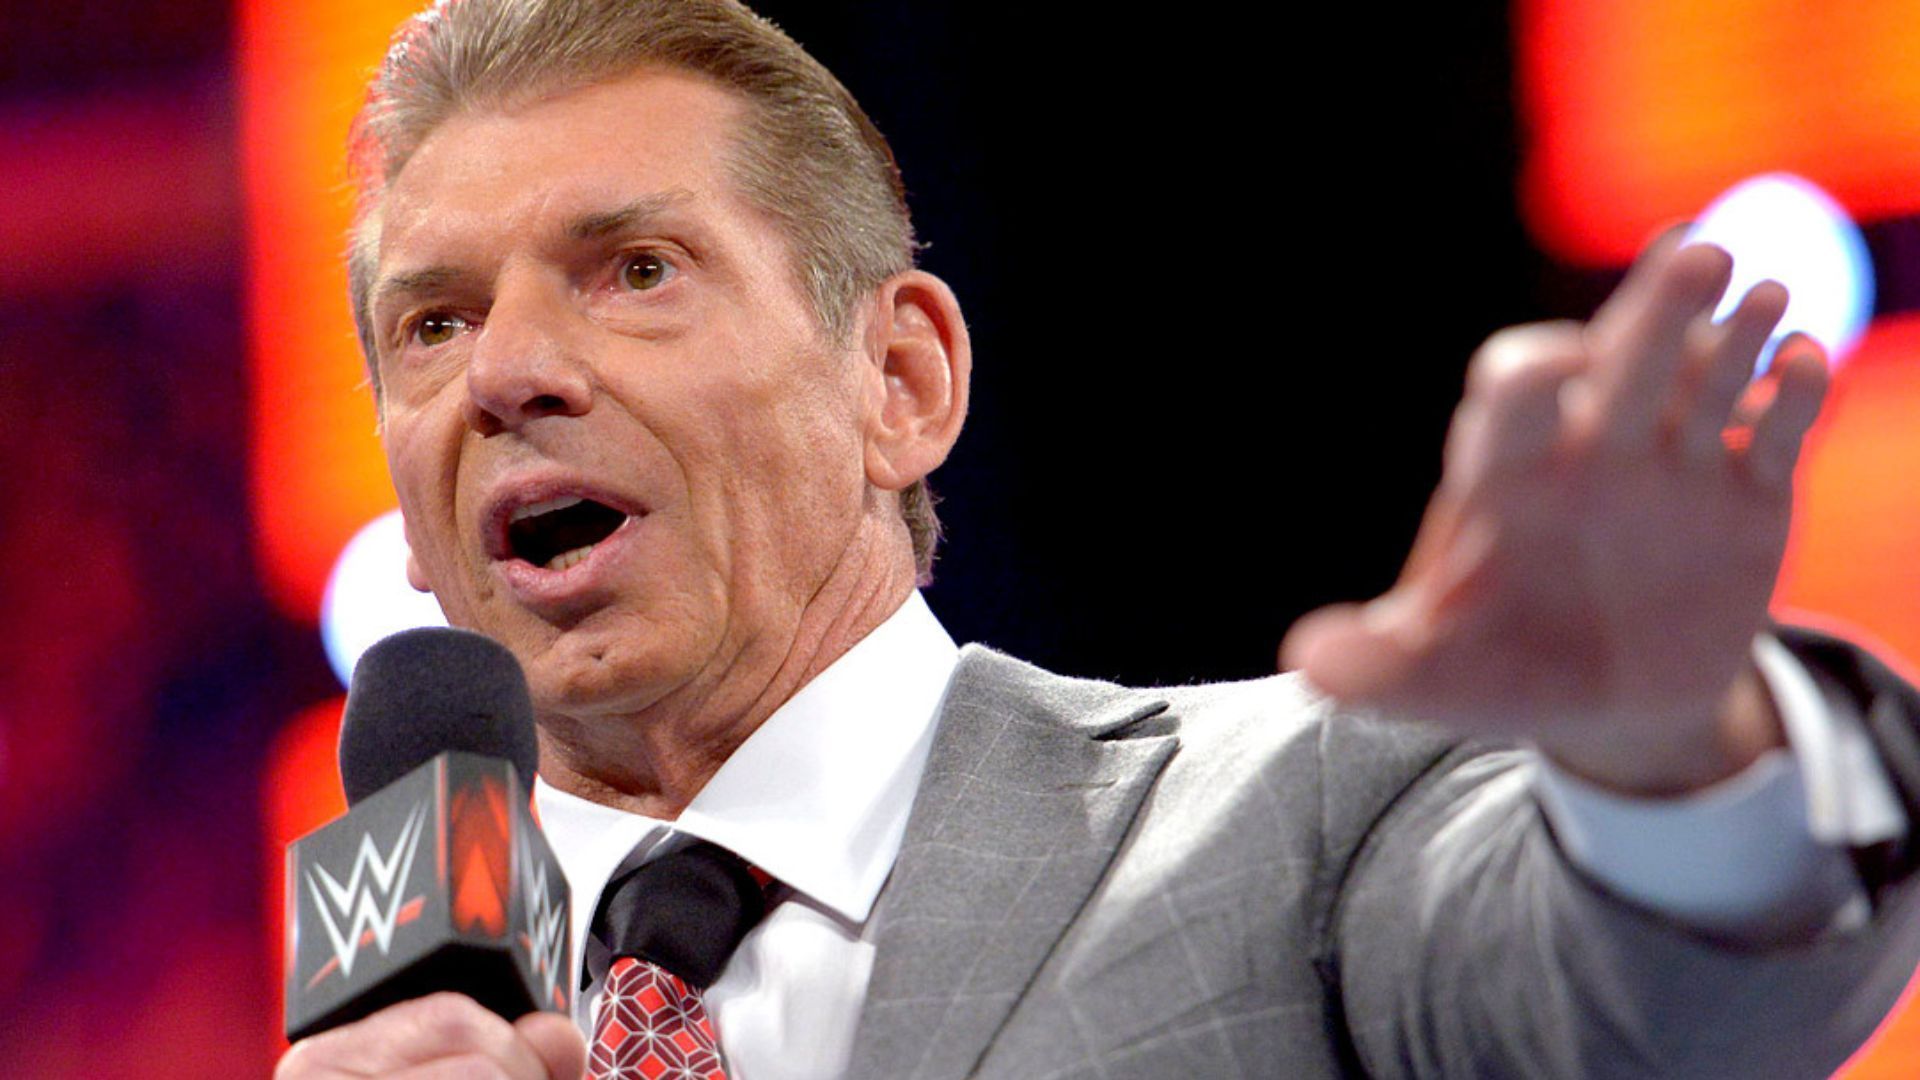 Vince McMahon returned to WWE as Executive Chairman of the Board